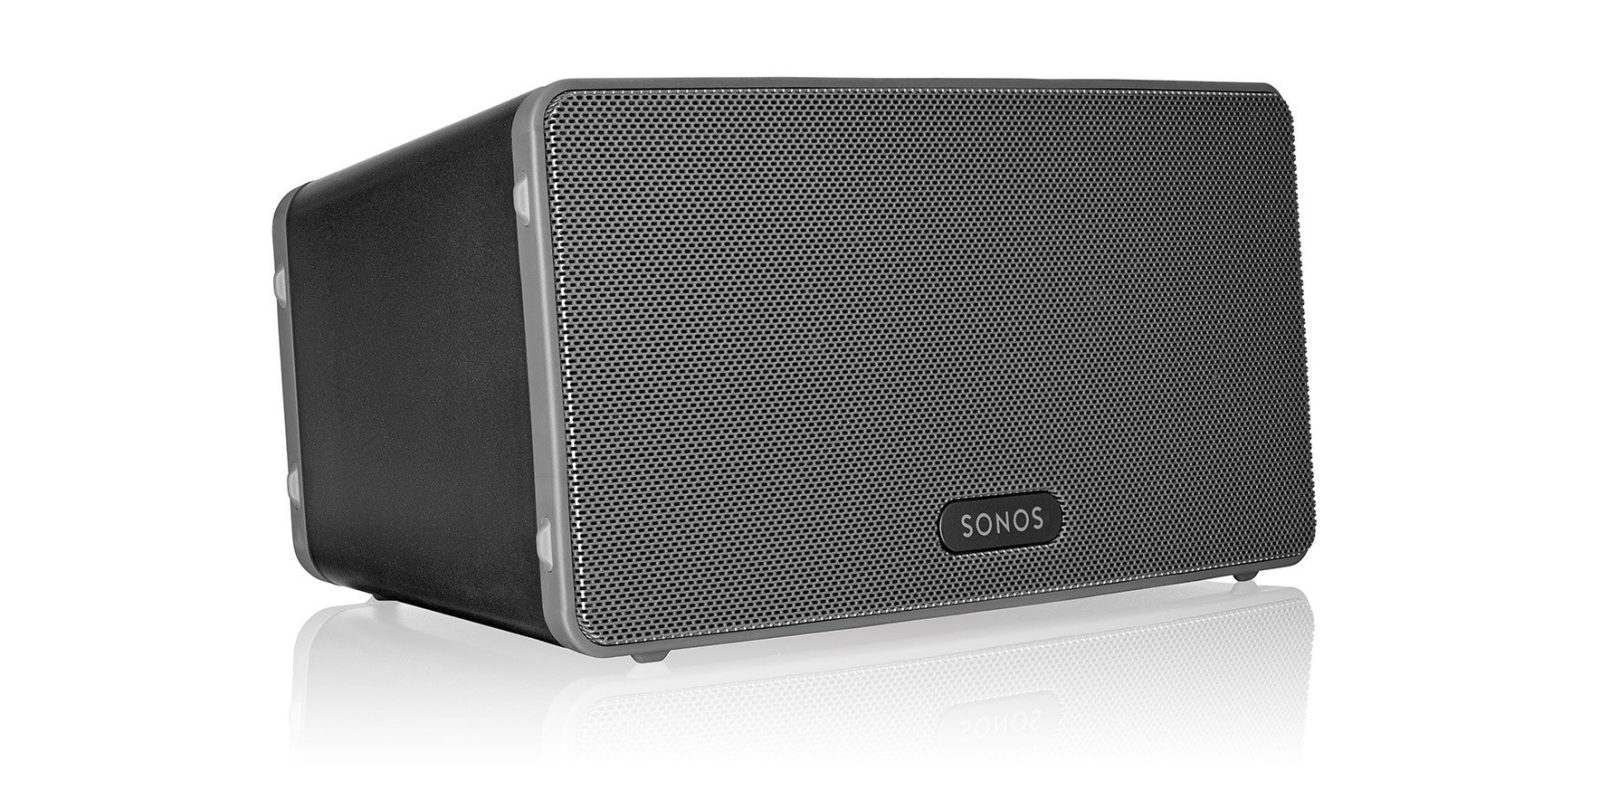 amazon-offers-a-rare-discount-on-the-sonos-play-3-wireless-speaker